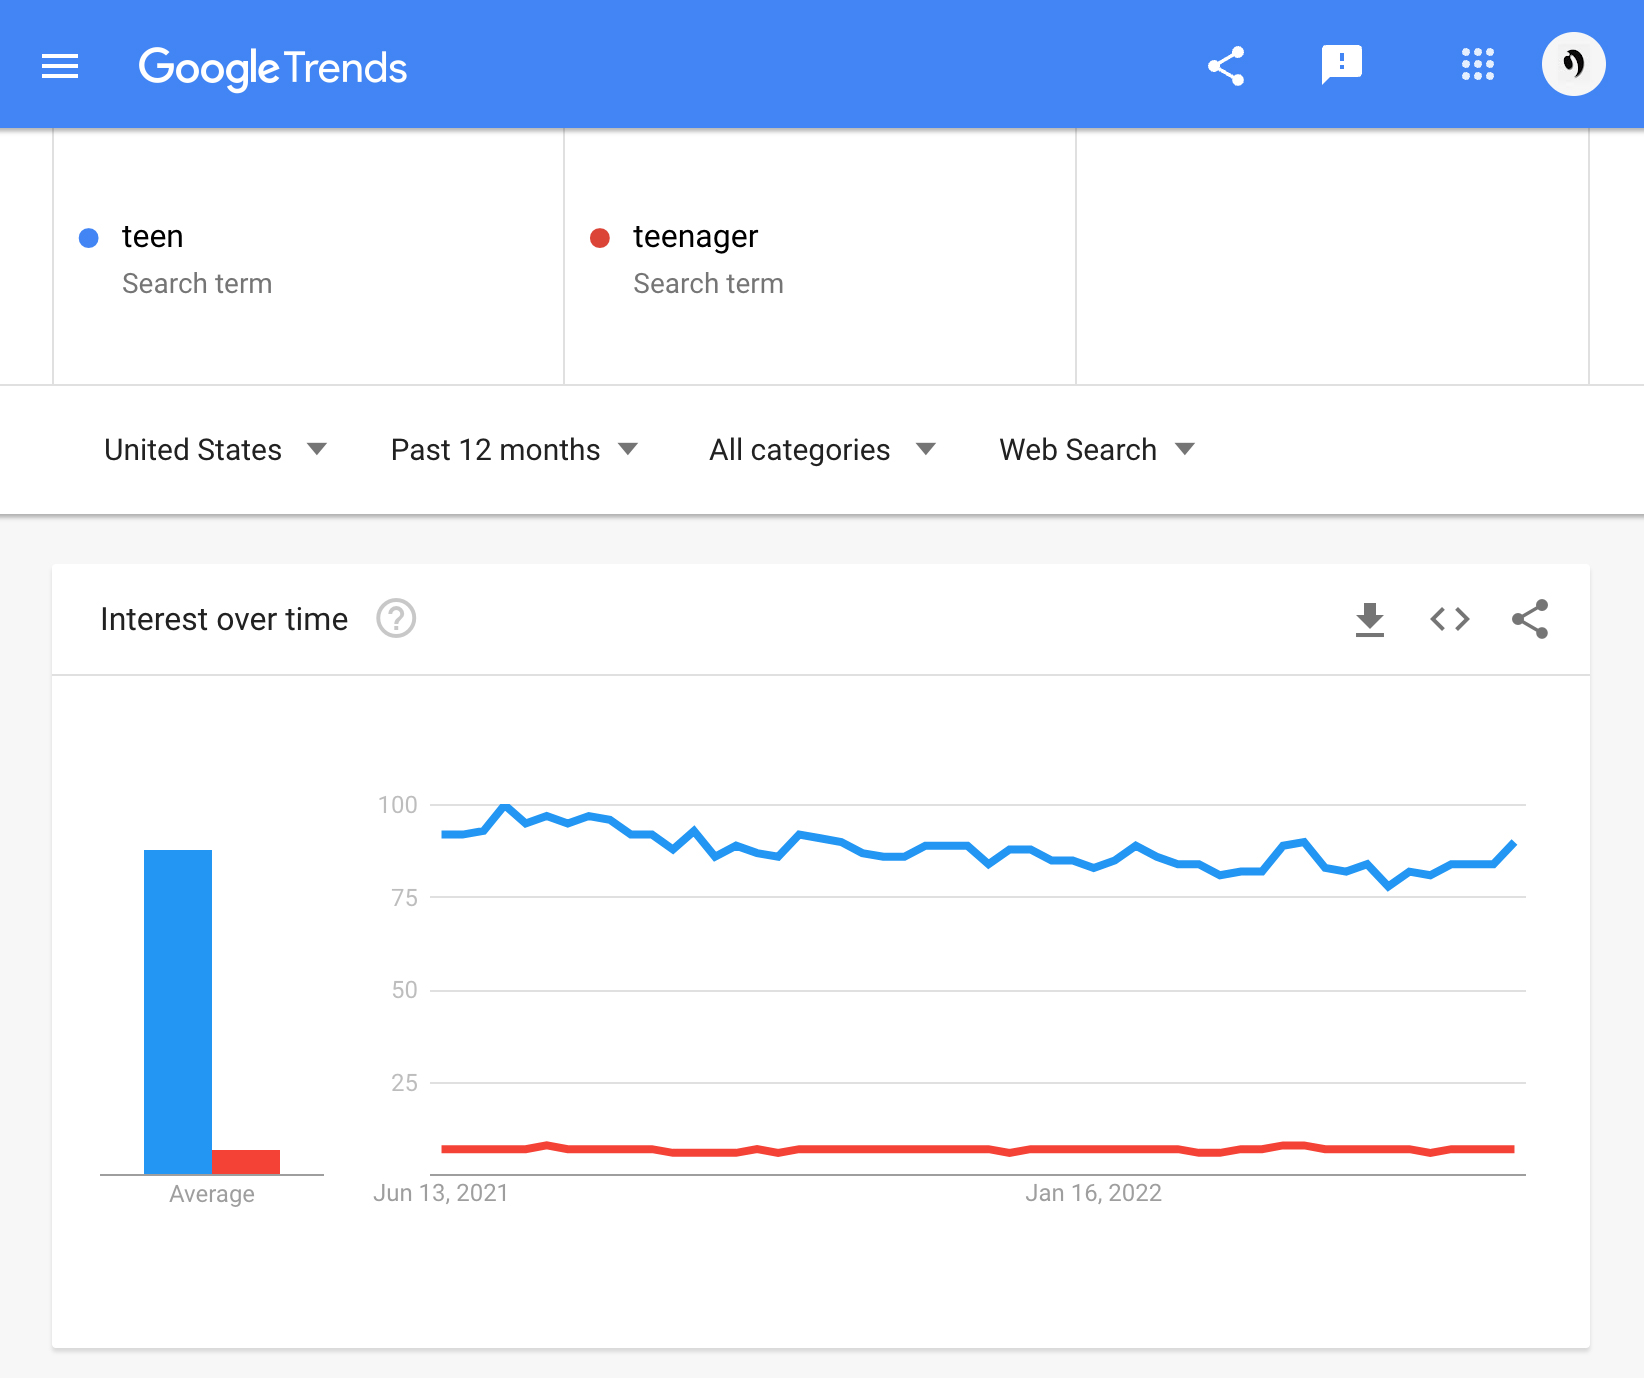 Interest over time on Google Trends for teen, teenager - United States